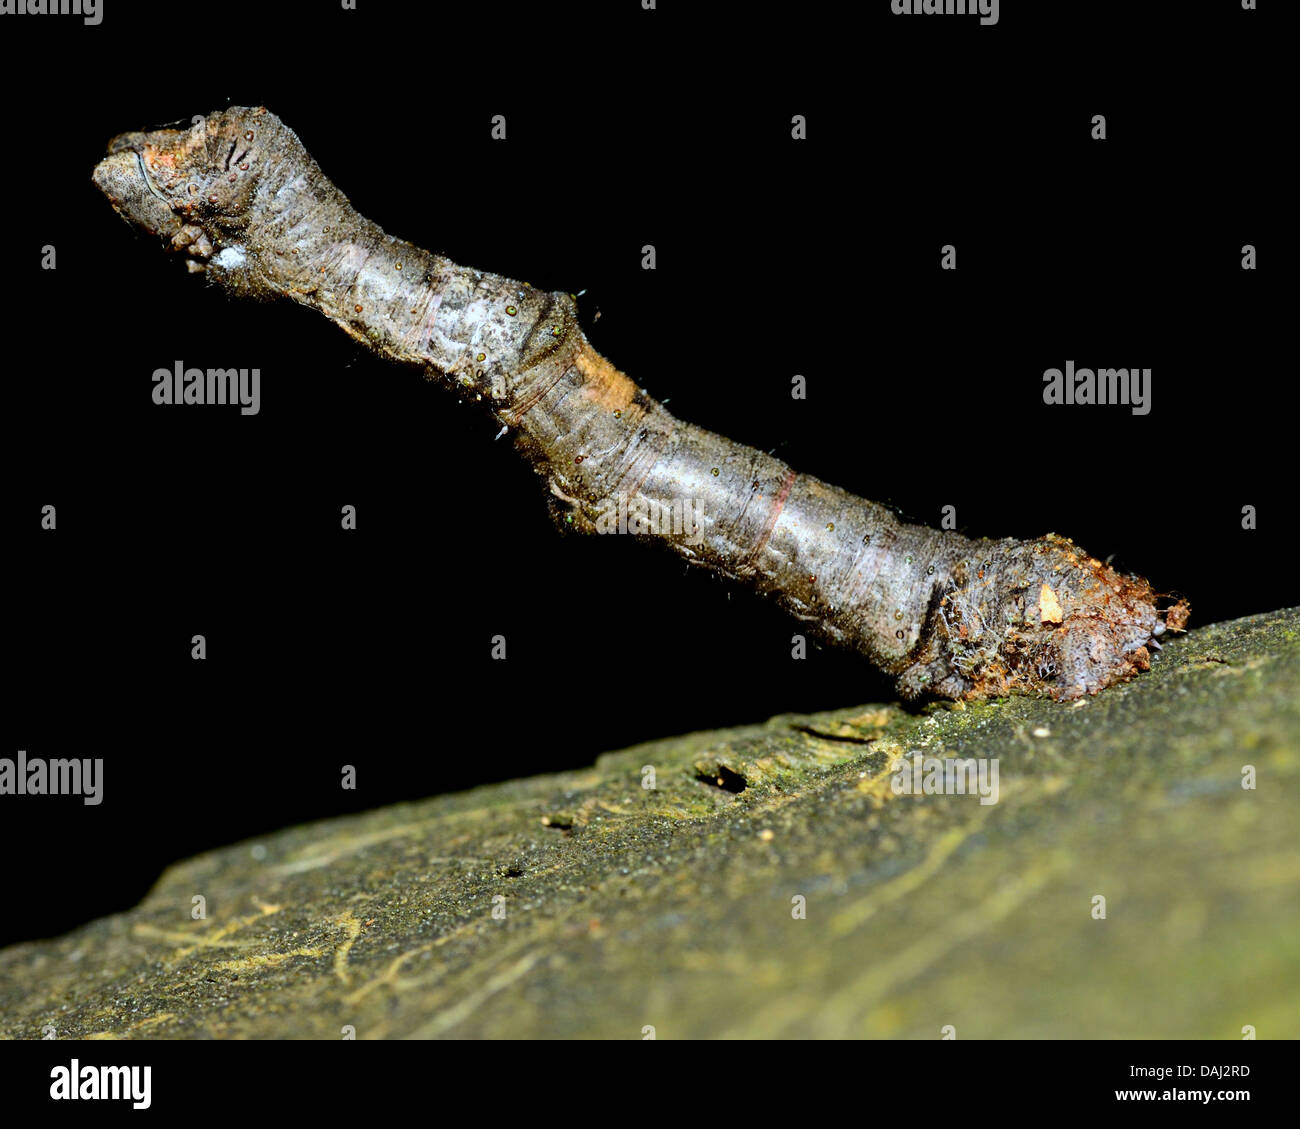 Spanworm mimmicking a tree twig perched on a wooden plank. Stock Photo